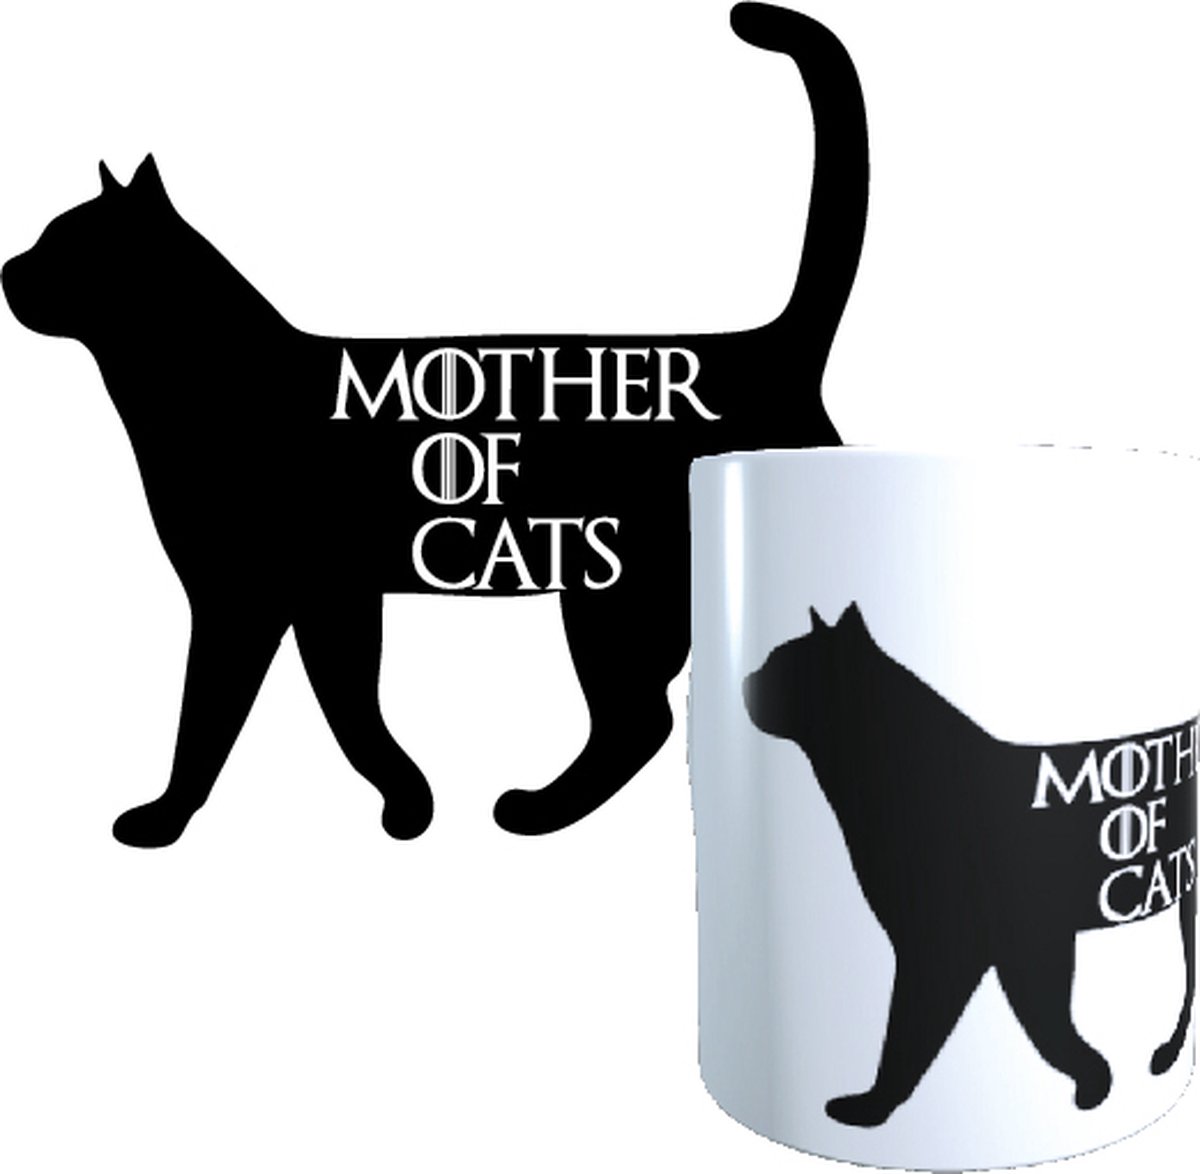 Mother of cats - fun mok - game of thrones - cats - funny - cadeau